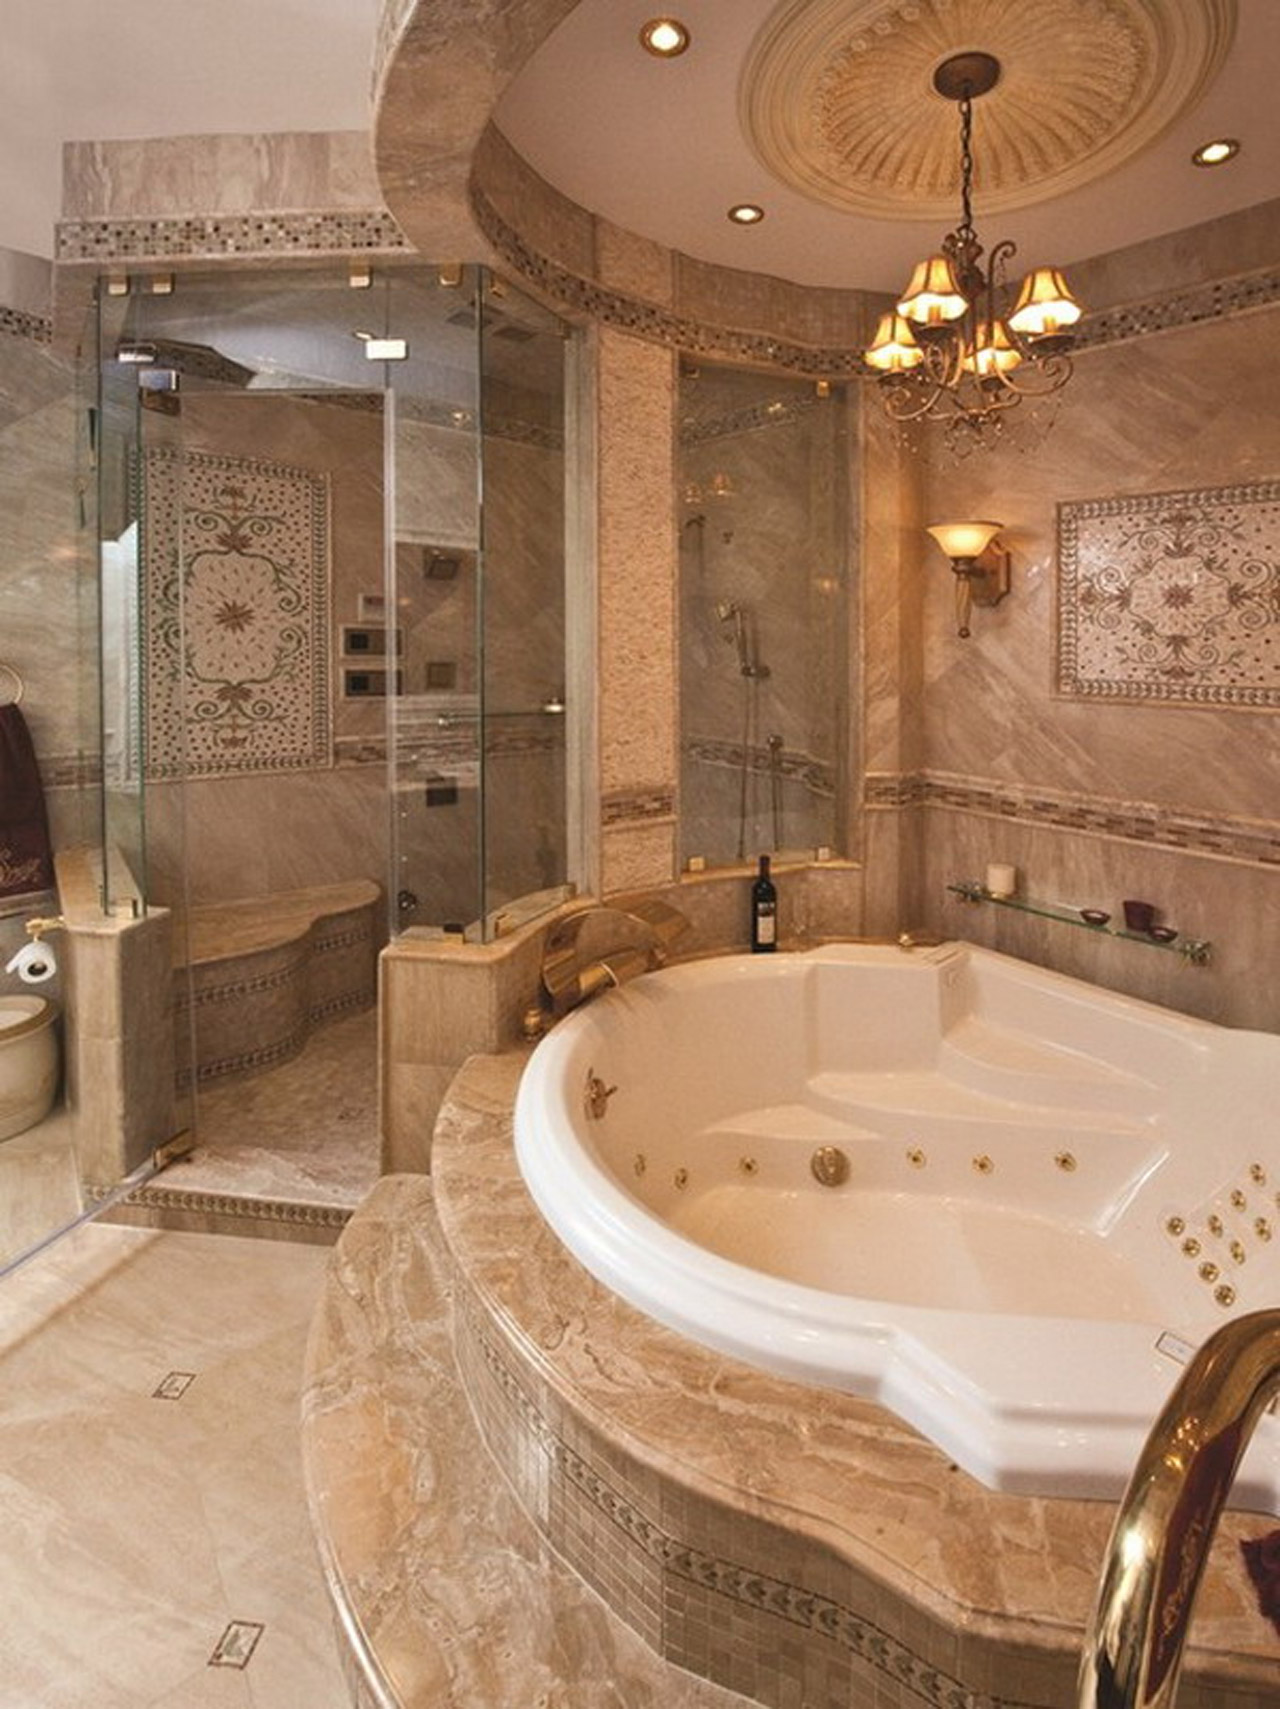 Bathroom Remodel Jacuzzi Glamorous Bathroom Remodel Ideas With Jacuzzi Tub Also Beauty Chandelier Design Plus Modern Large Glass Shower Doors Design Ideas Along With Natural Marble Floor Design Bathroom Bathroom Remodel Ideas In Nature Ideas